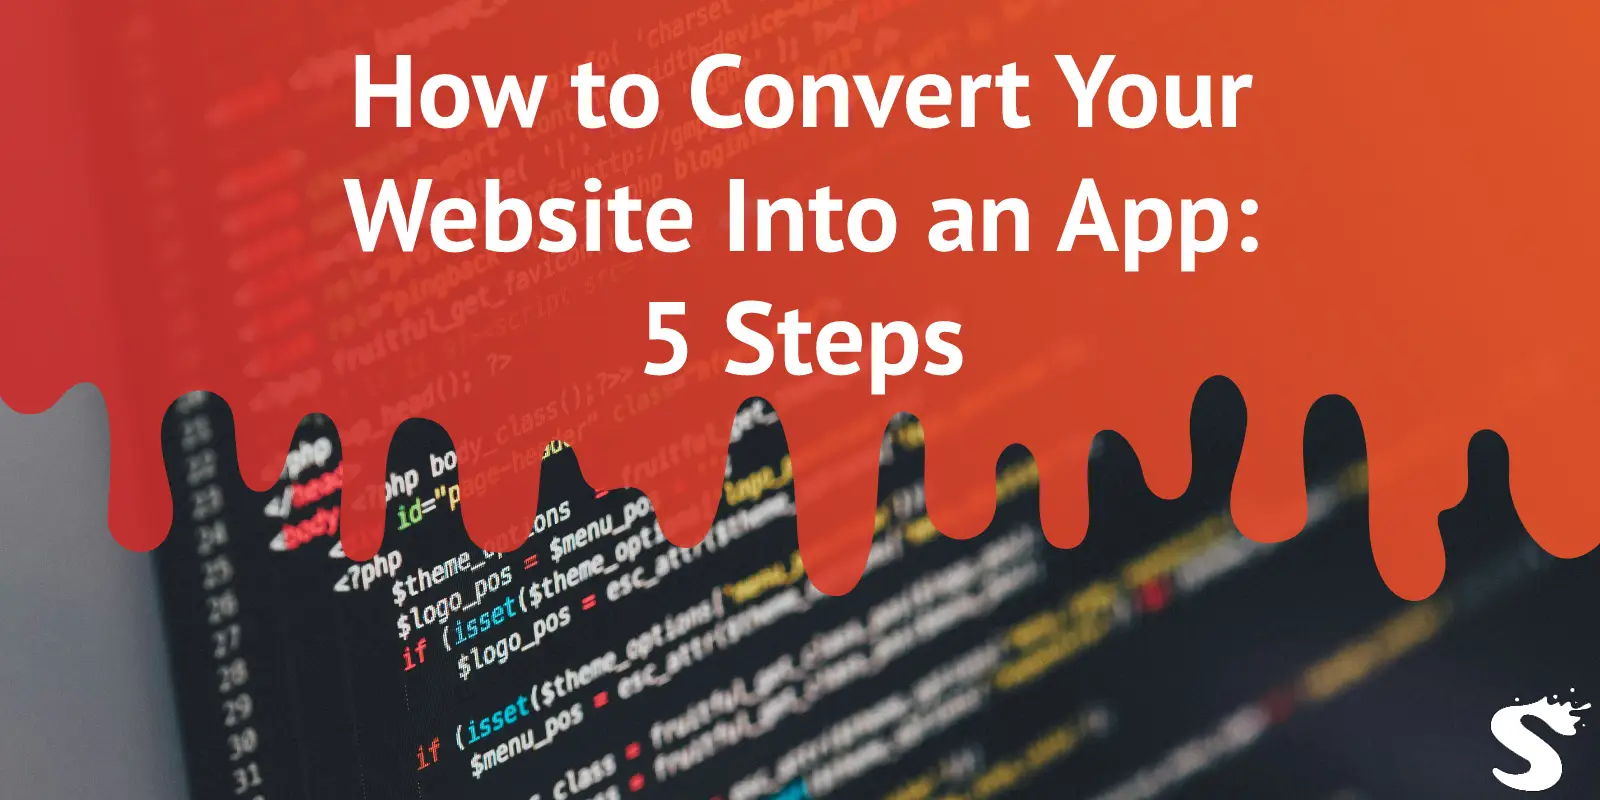 How to Convert Your Website Into an App: 5 Steps